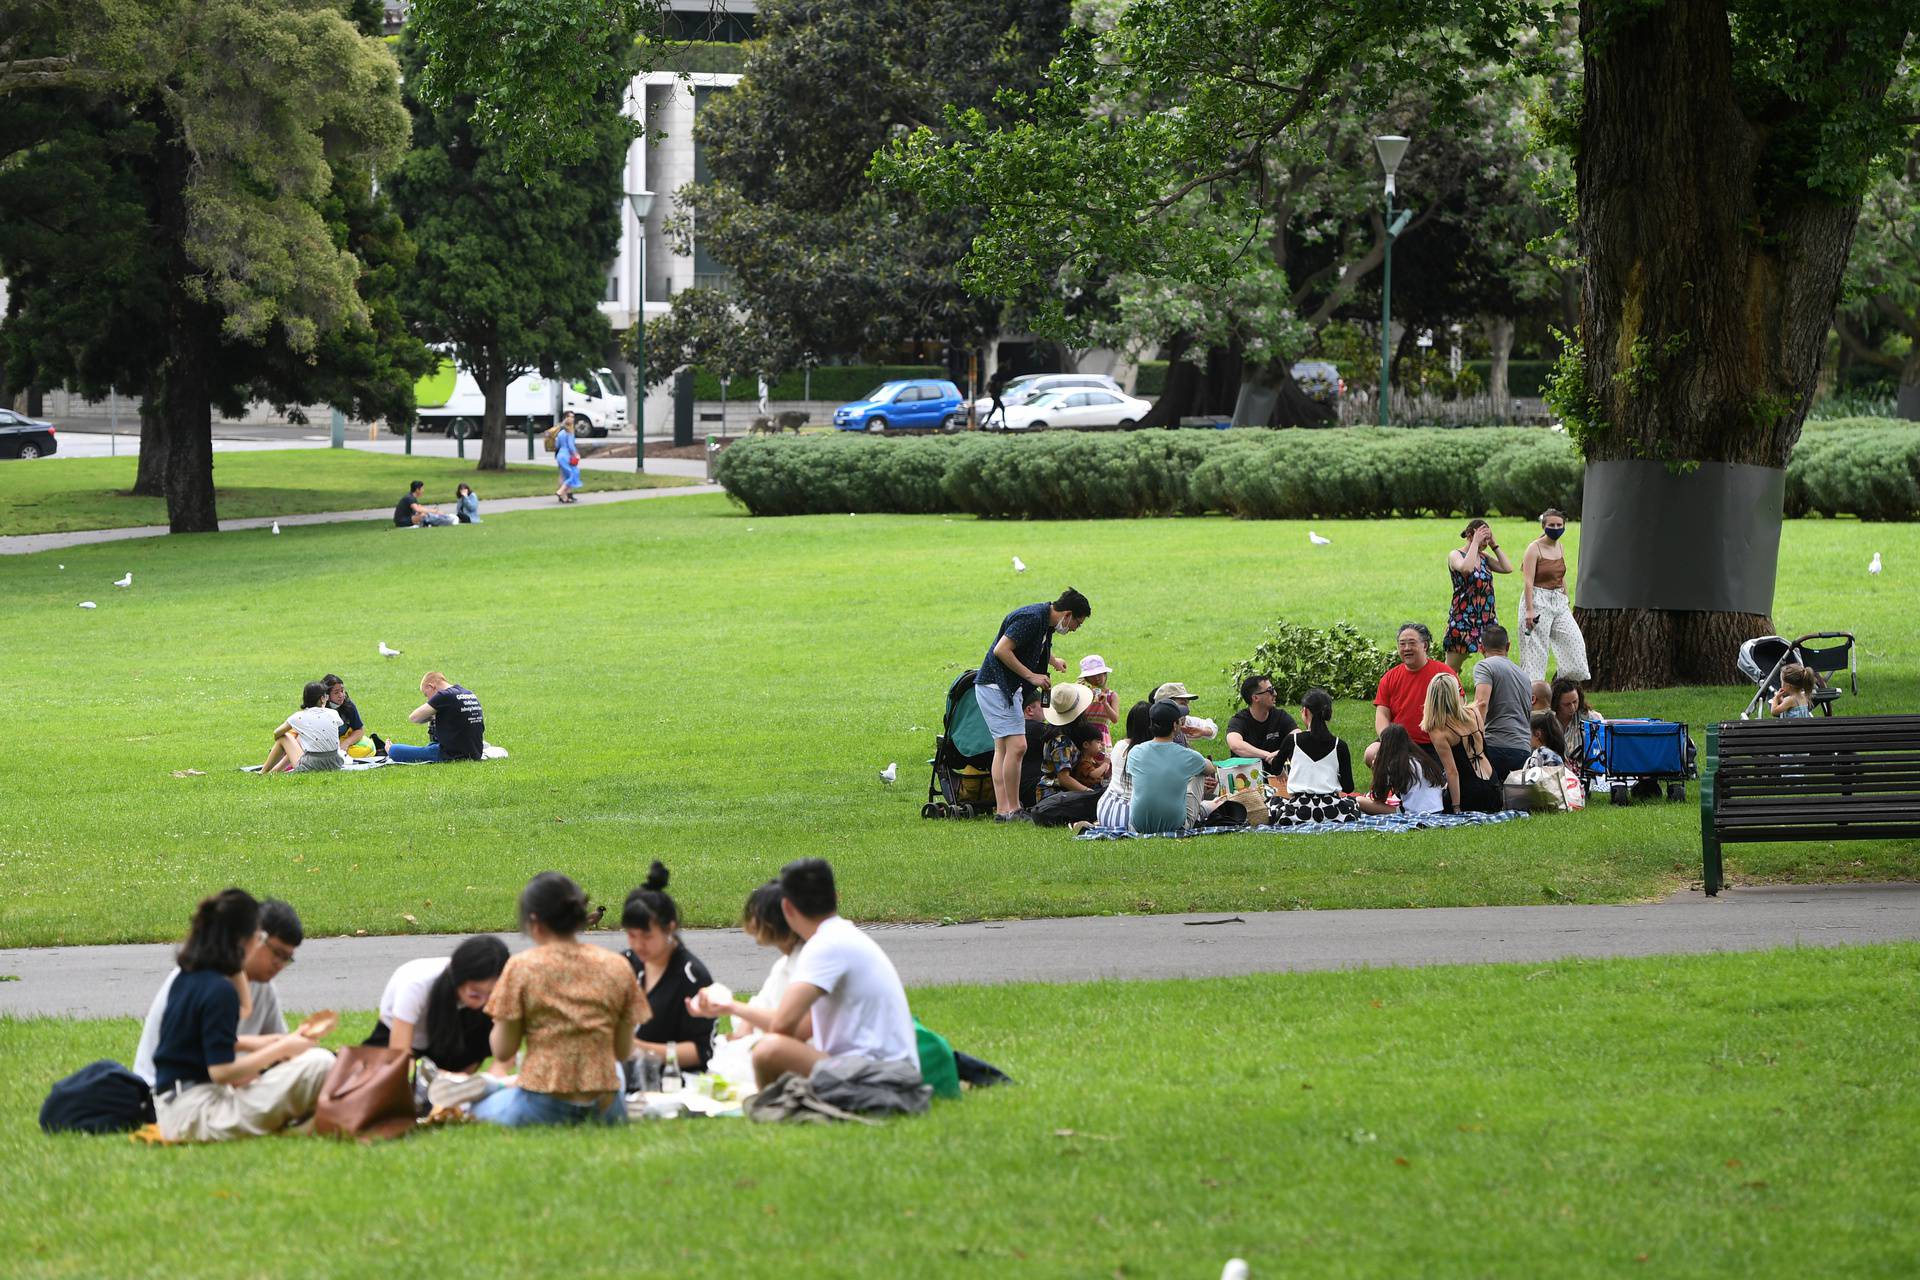 People are seen at a park after the state of Victoria saw COVID-19 case numbers drop in Melbourne